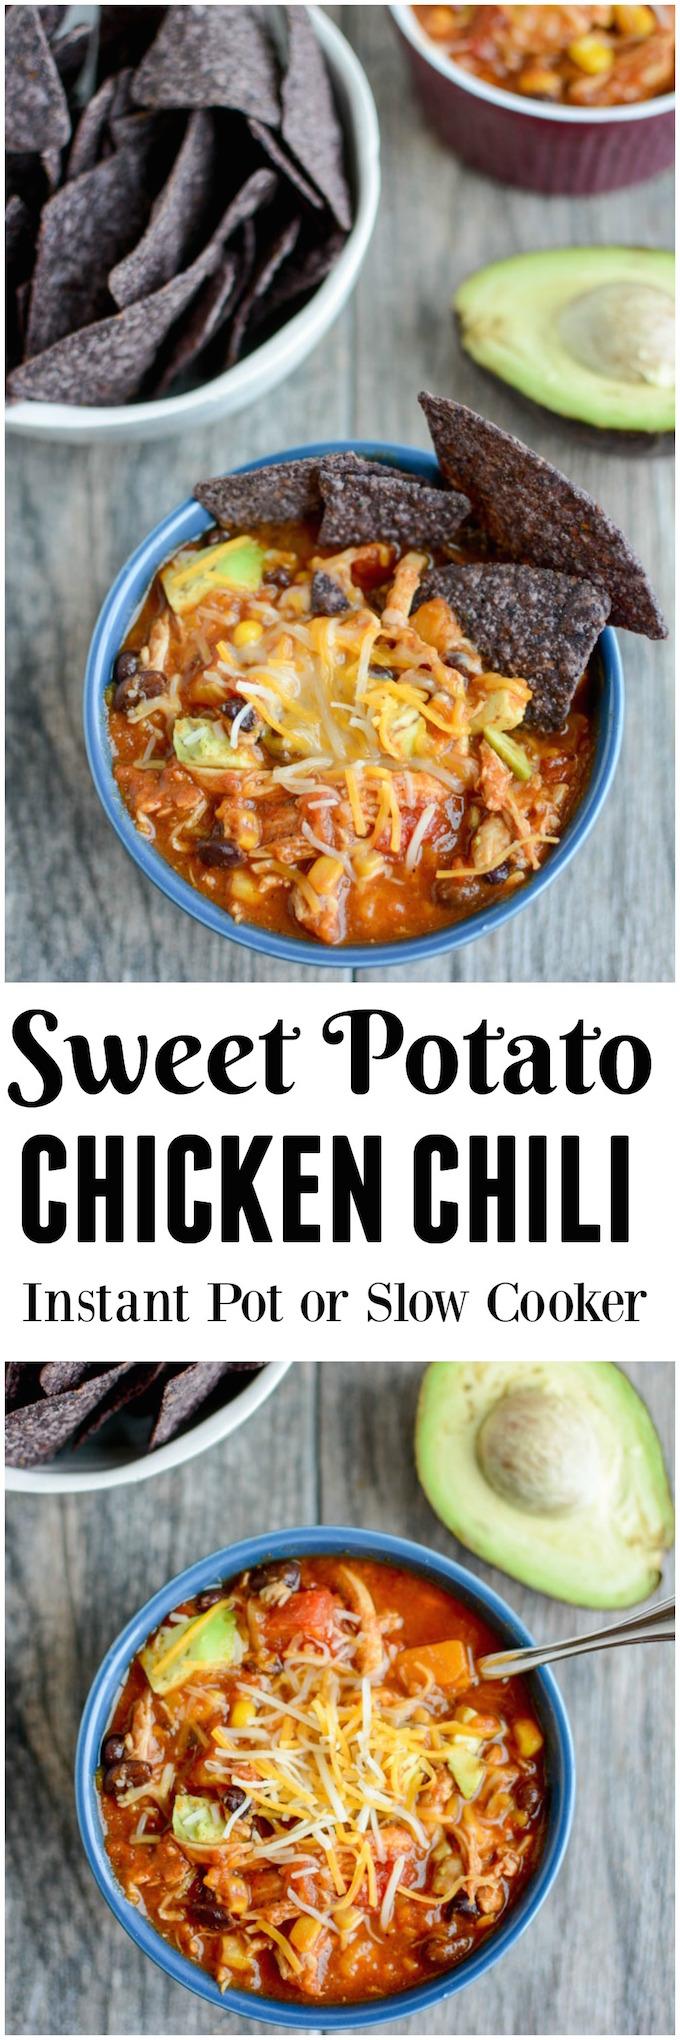 This Sweet Potato Chicken Chili can be made in the Instant Pot or slow cooker for an easy, healthy dinner. And the leftovers make the perfect packable lunch. 